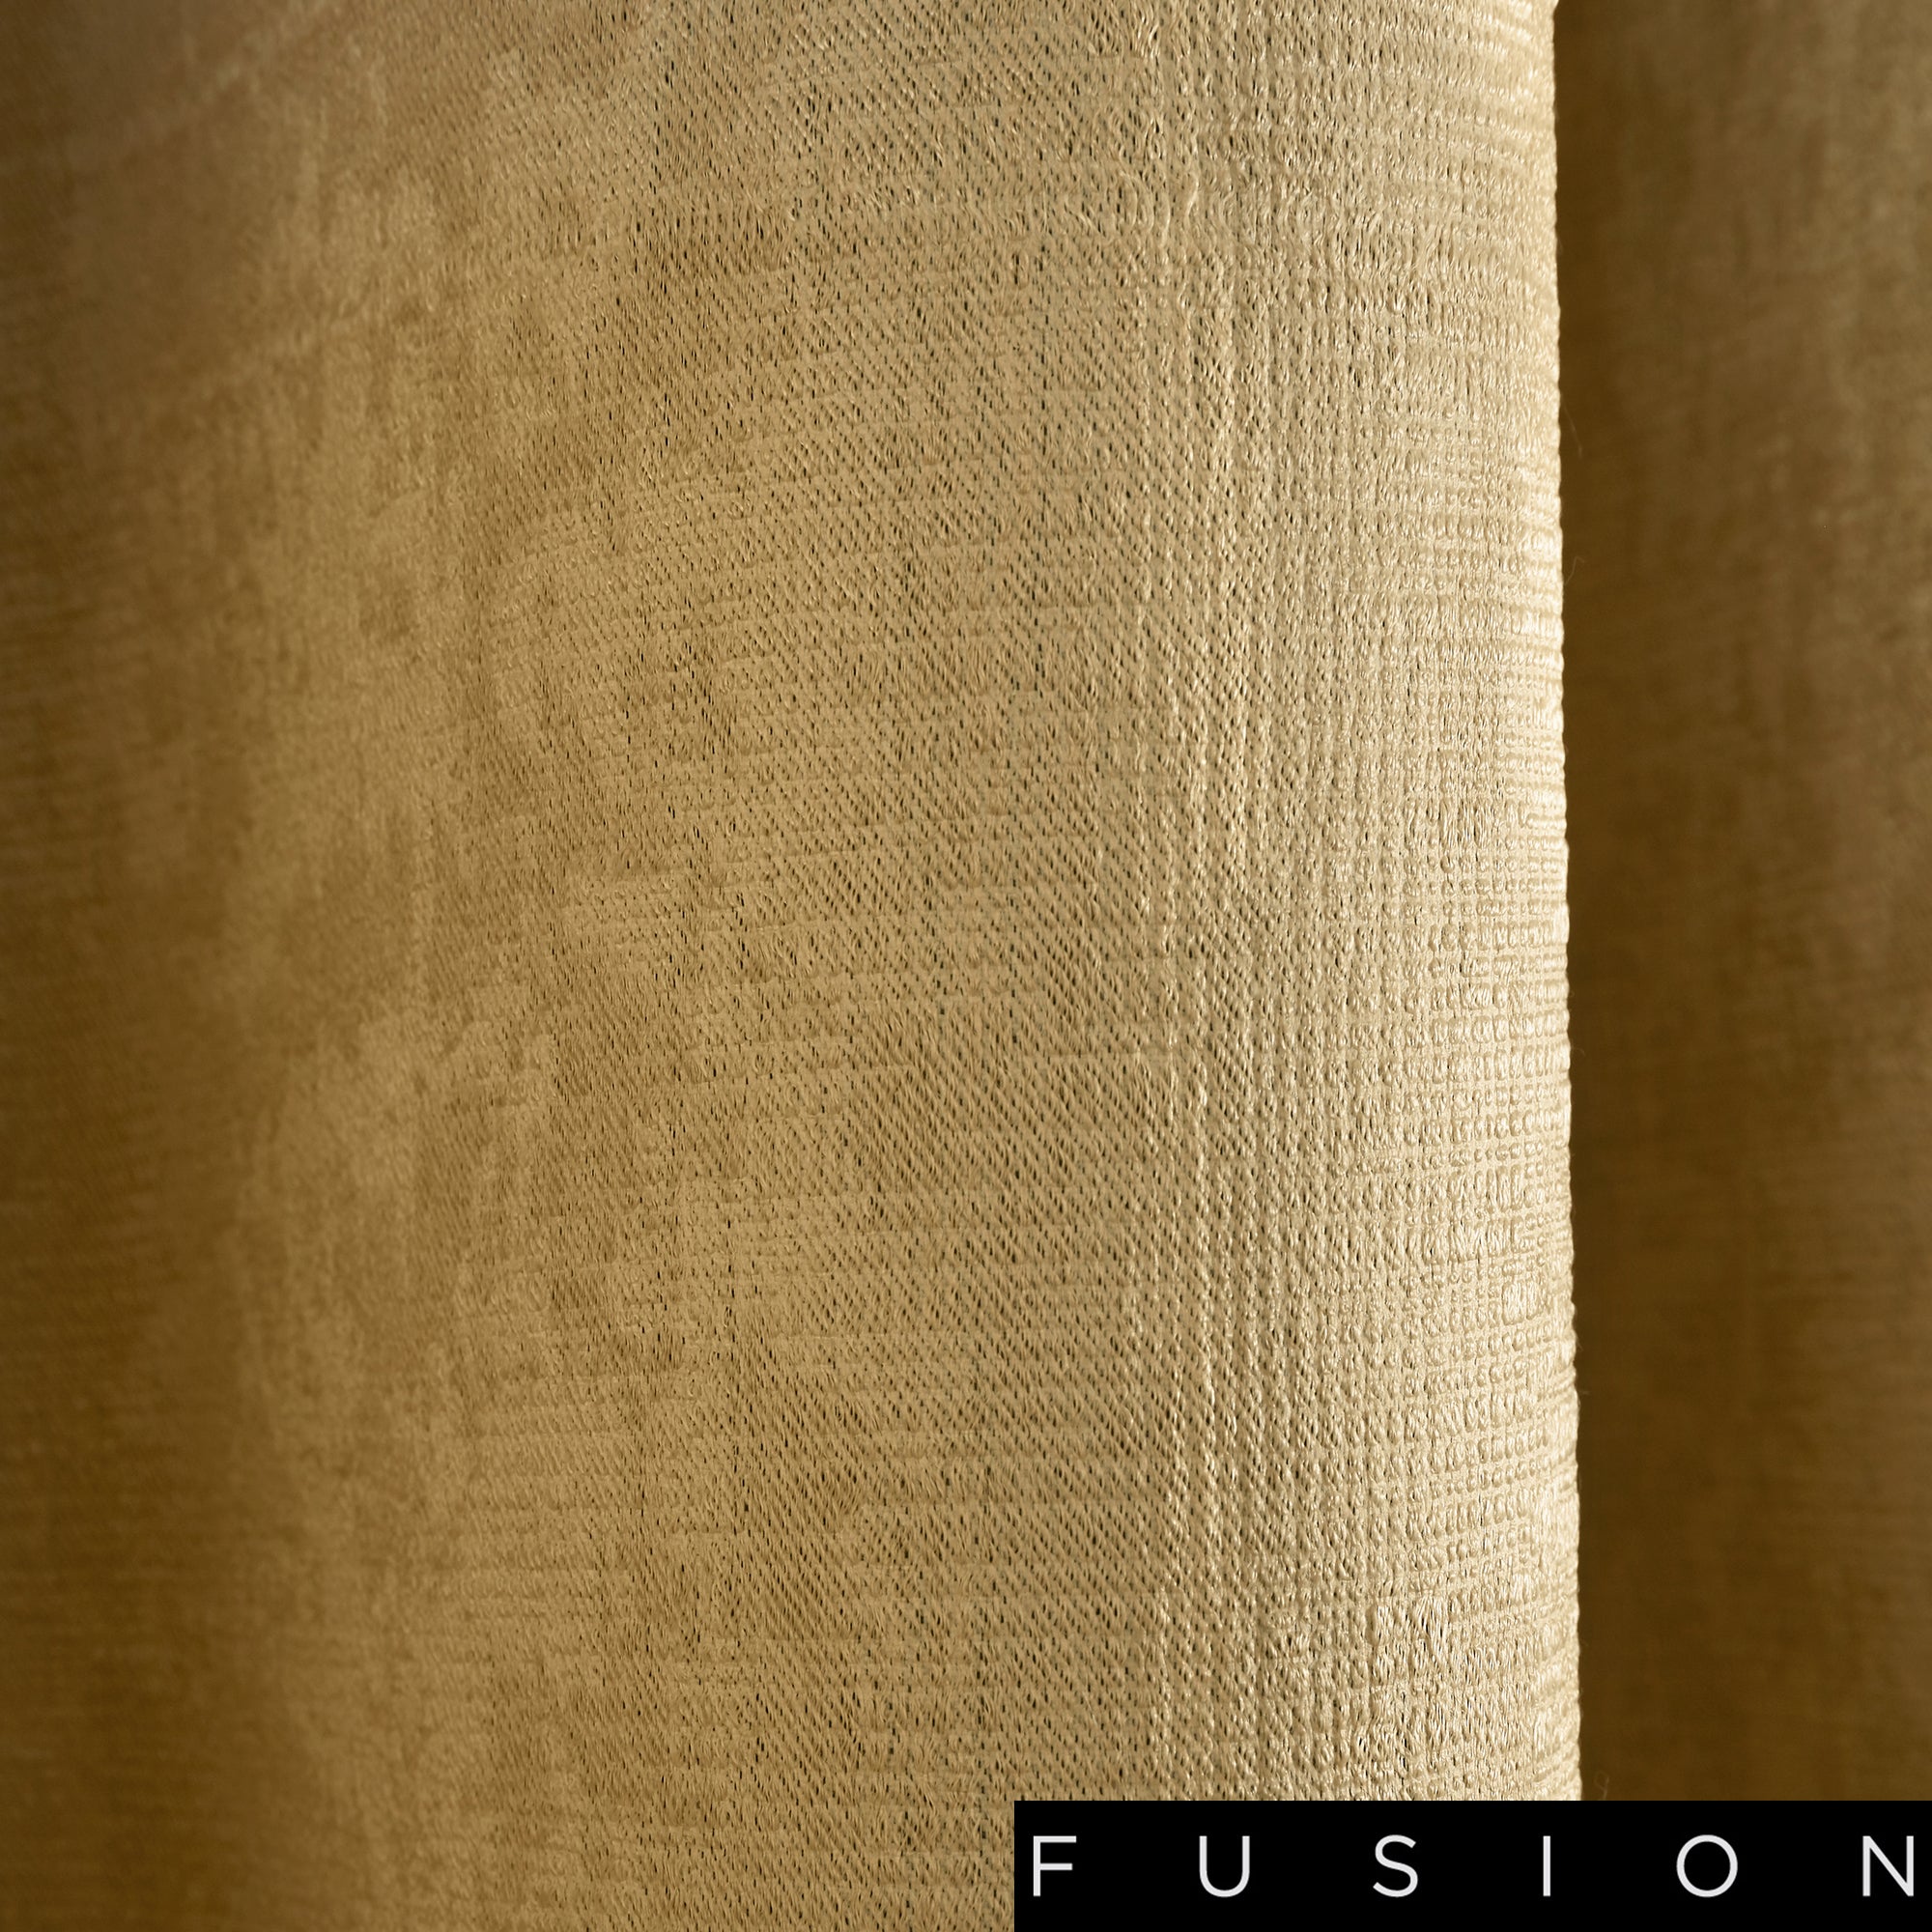 Strata - Blockout Eyelet Curtains in Ochre - by Fusion